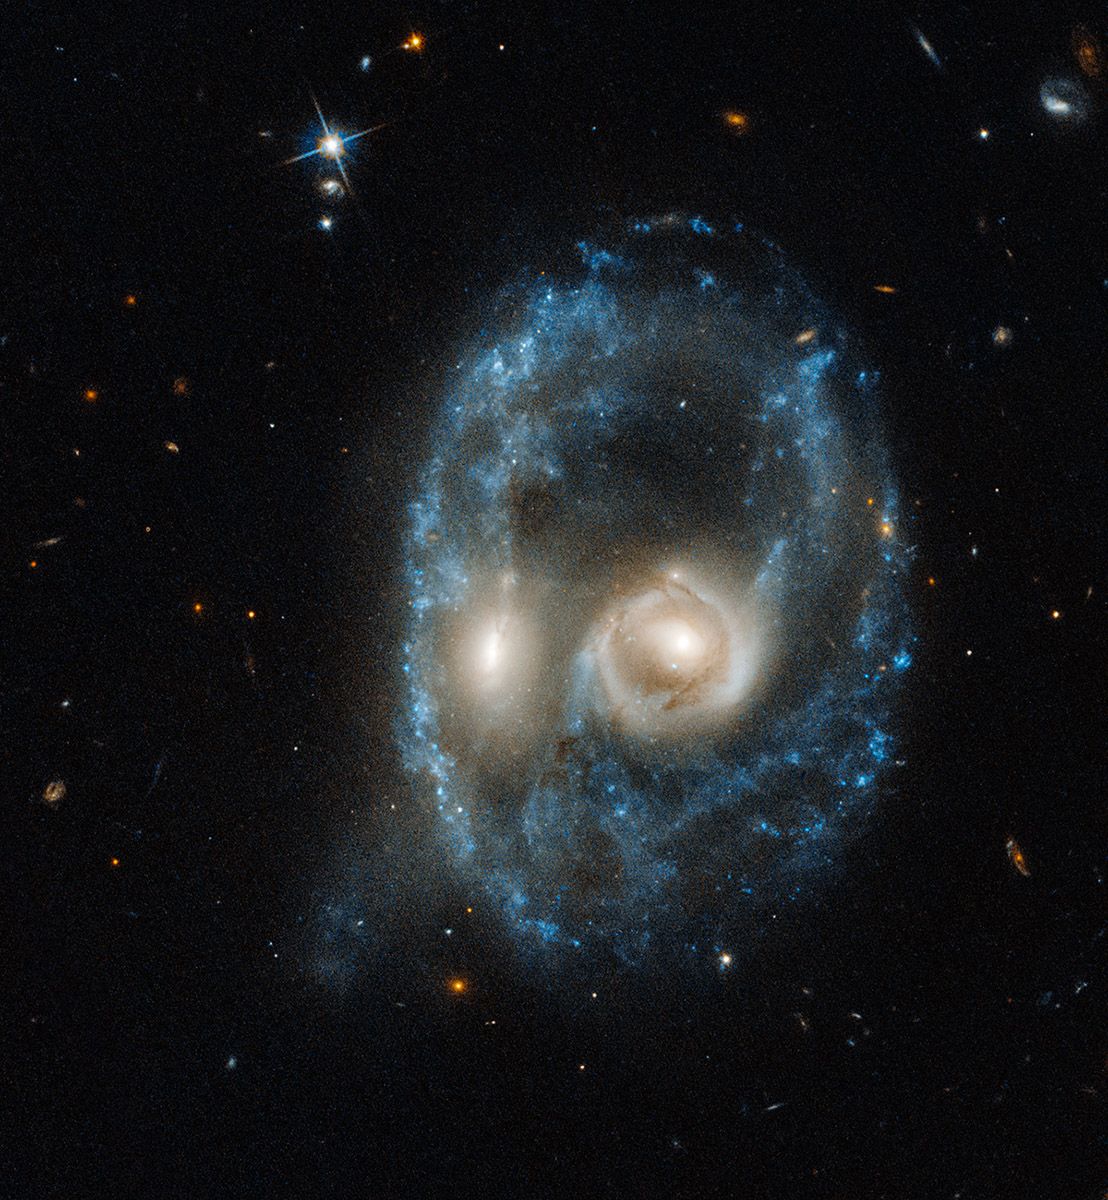 HUBBLE CAPTURES GALAXIES' GHOSTLY GAZE